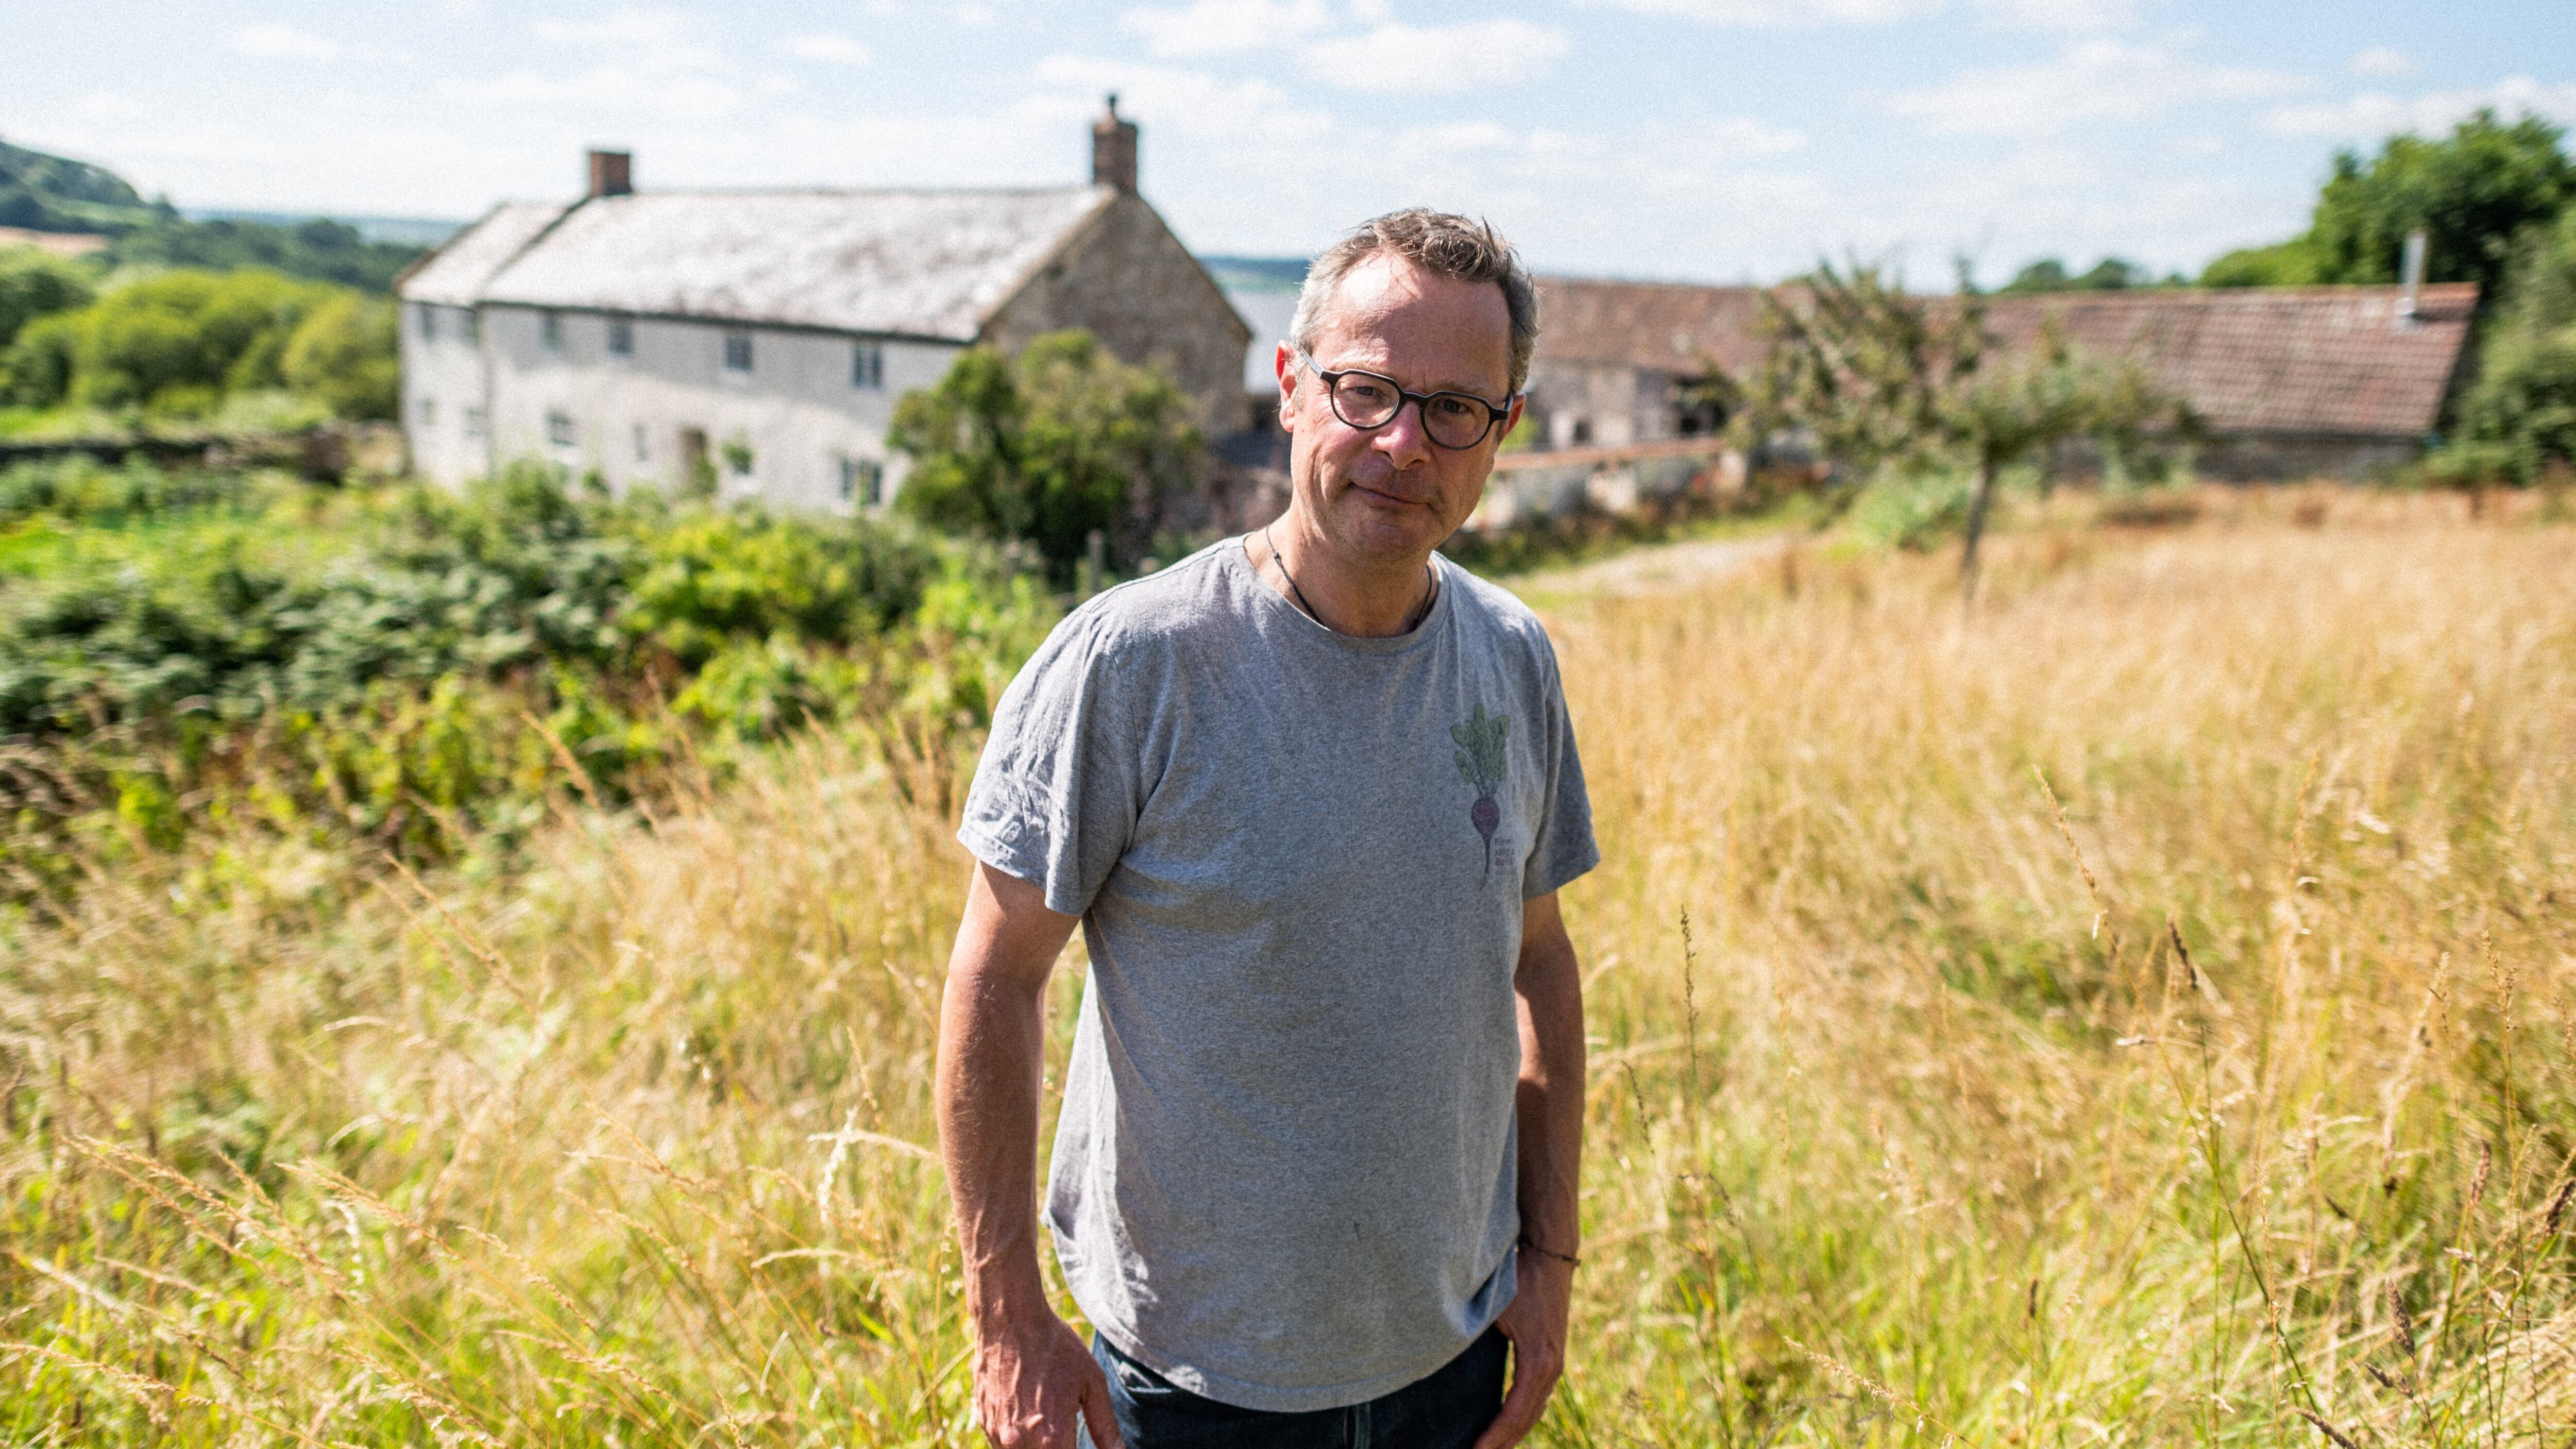 Pulses, nuts seeds, herbs and spices all count towards your total plant number, says Hugh Fearnley-Whittingstall